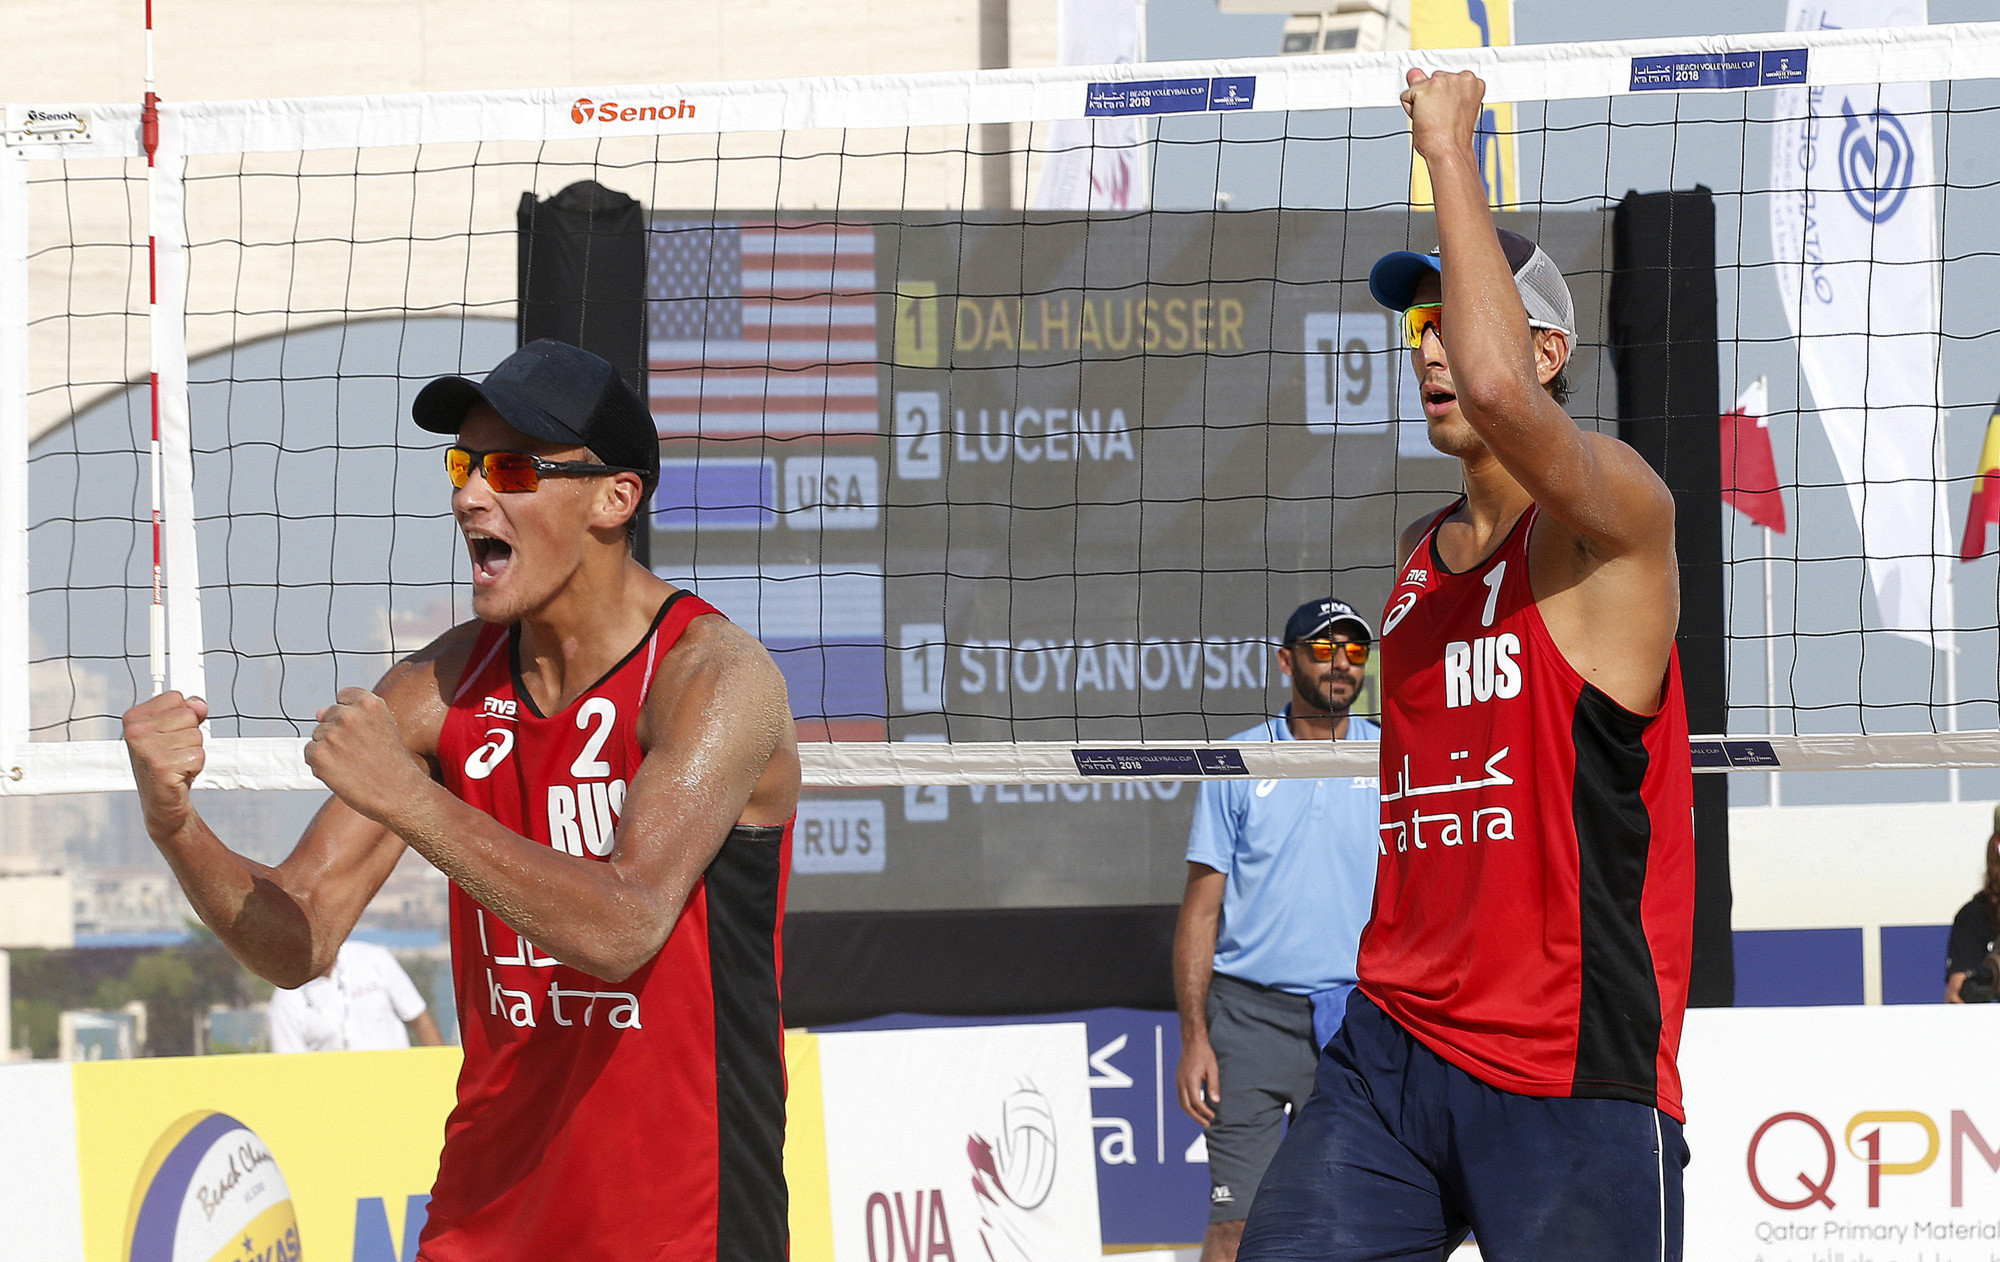 Russia’s new team of Oleg Stoyanovskiy and Igor Velichko.reached their first FIVB Beach World Tour final in only their second tournament together in Doha ©FIVB